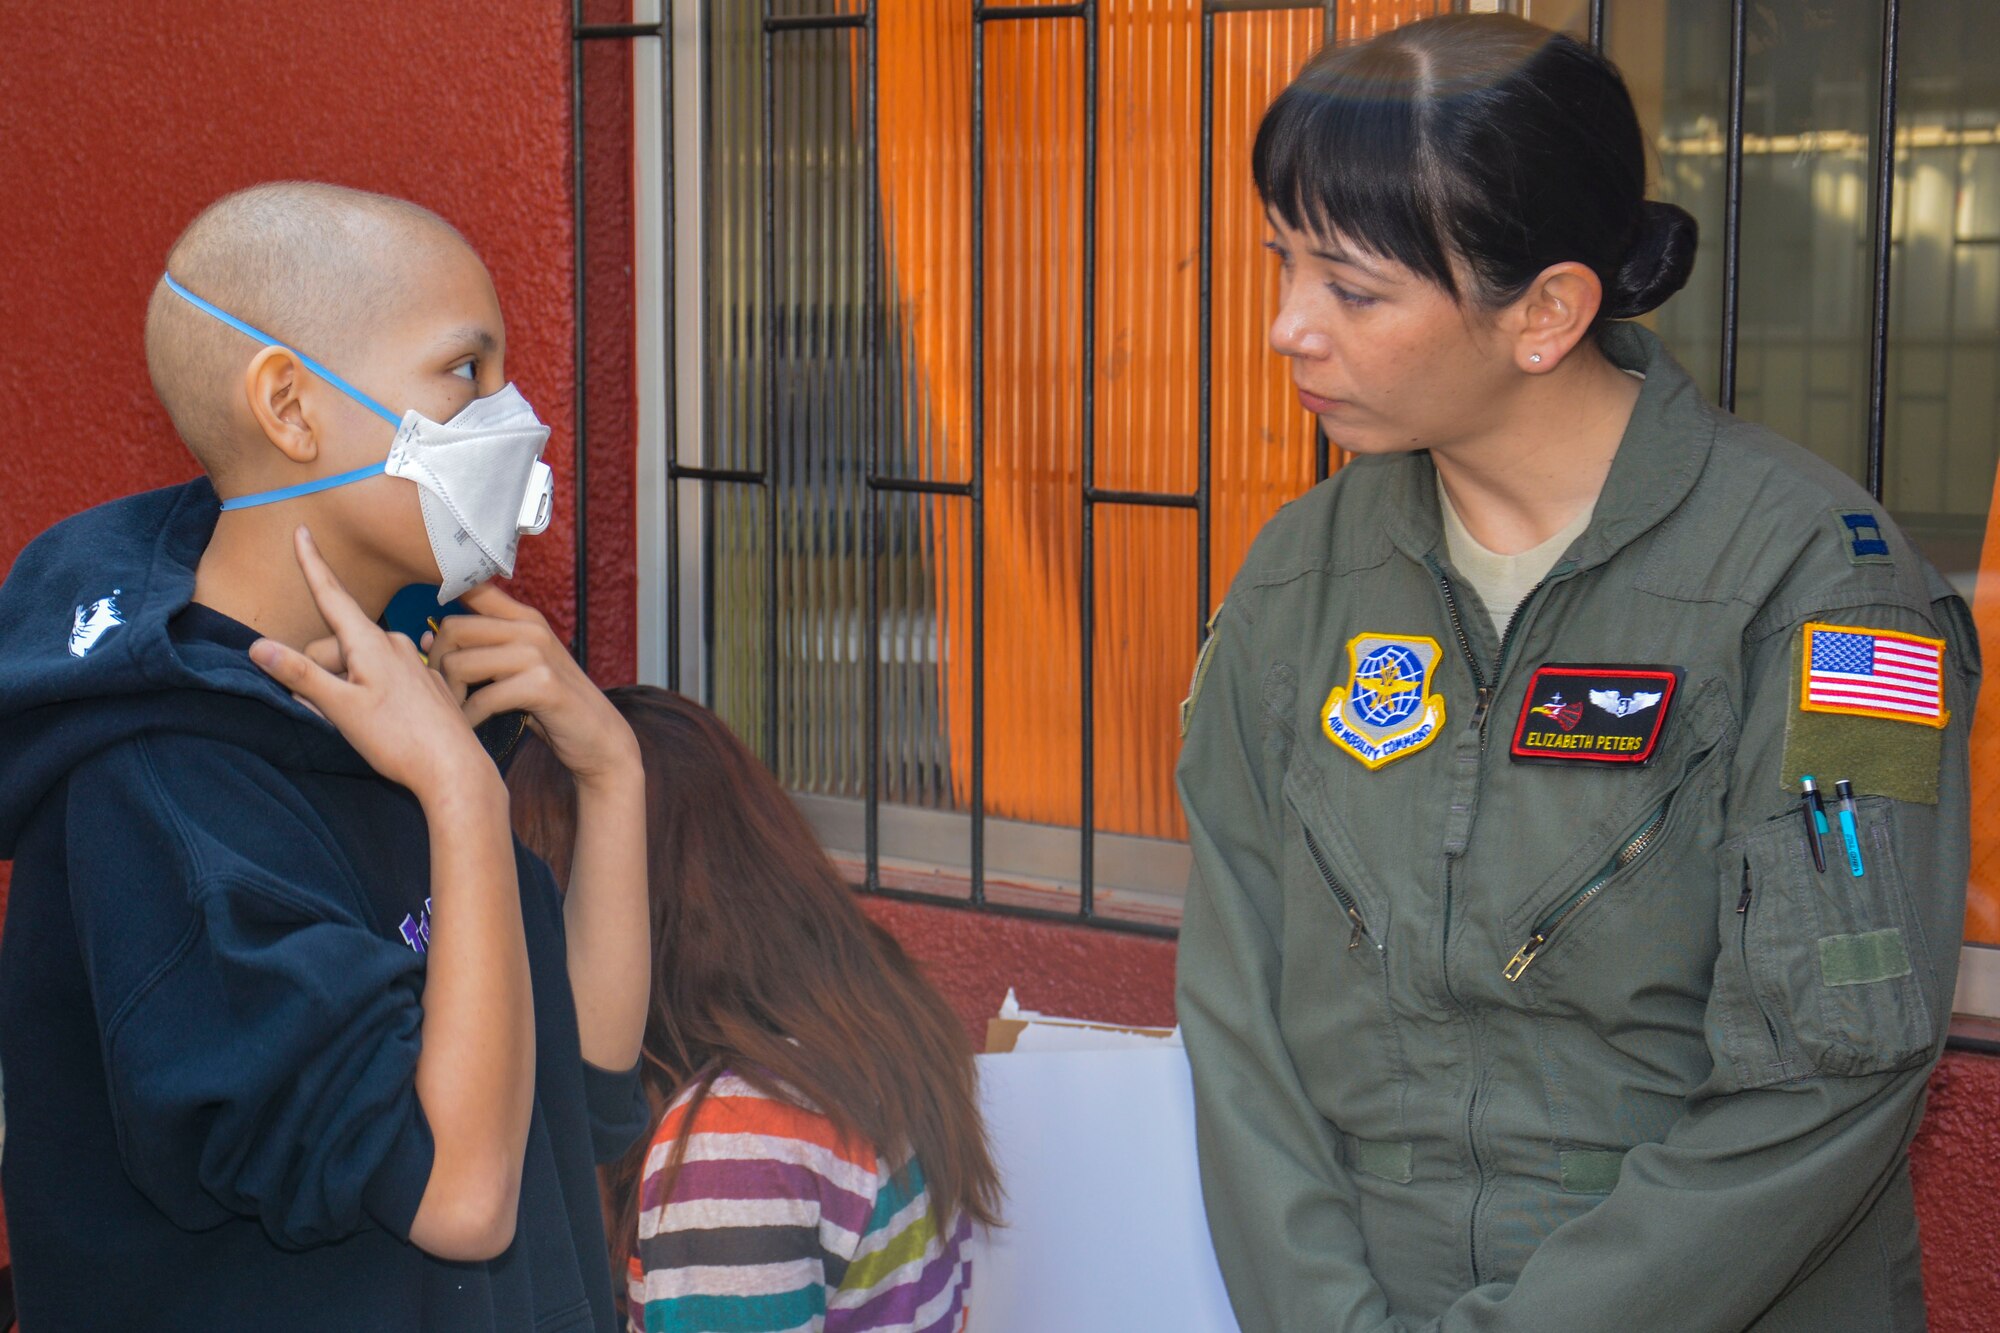 Capt. Elizabeth Peters, Aeromedical Evacuation Air Adviser for the 571st Mobility Support Advisory Squadron, speaks with a Chilean child while visiting local hospital in Santiago, Chile, March 28. Nearly 60 U.S. airmen are on a temporary duty assignment in Chile to participate in subject matter expert exchanges with Chilean air force counterparts and host static displays of the C-130 Hercules and F-16 Fighting Falcon at the FIDAE Air Show March 25 to 30.  Participants in the visit met with more than 20 children at the hospital receiving long-term care and spent time coloring, building small airplanes and playing. (U.S. Air Force photo by Capt. Justin Brockhoff/Released)